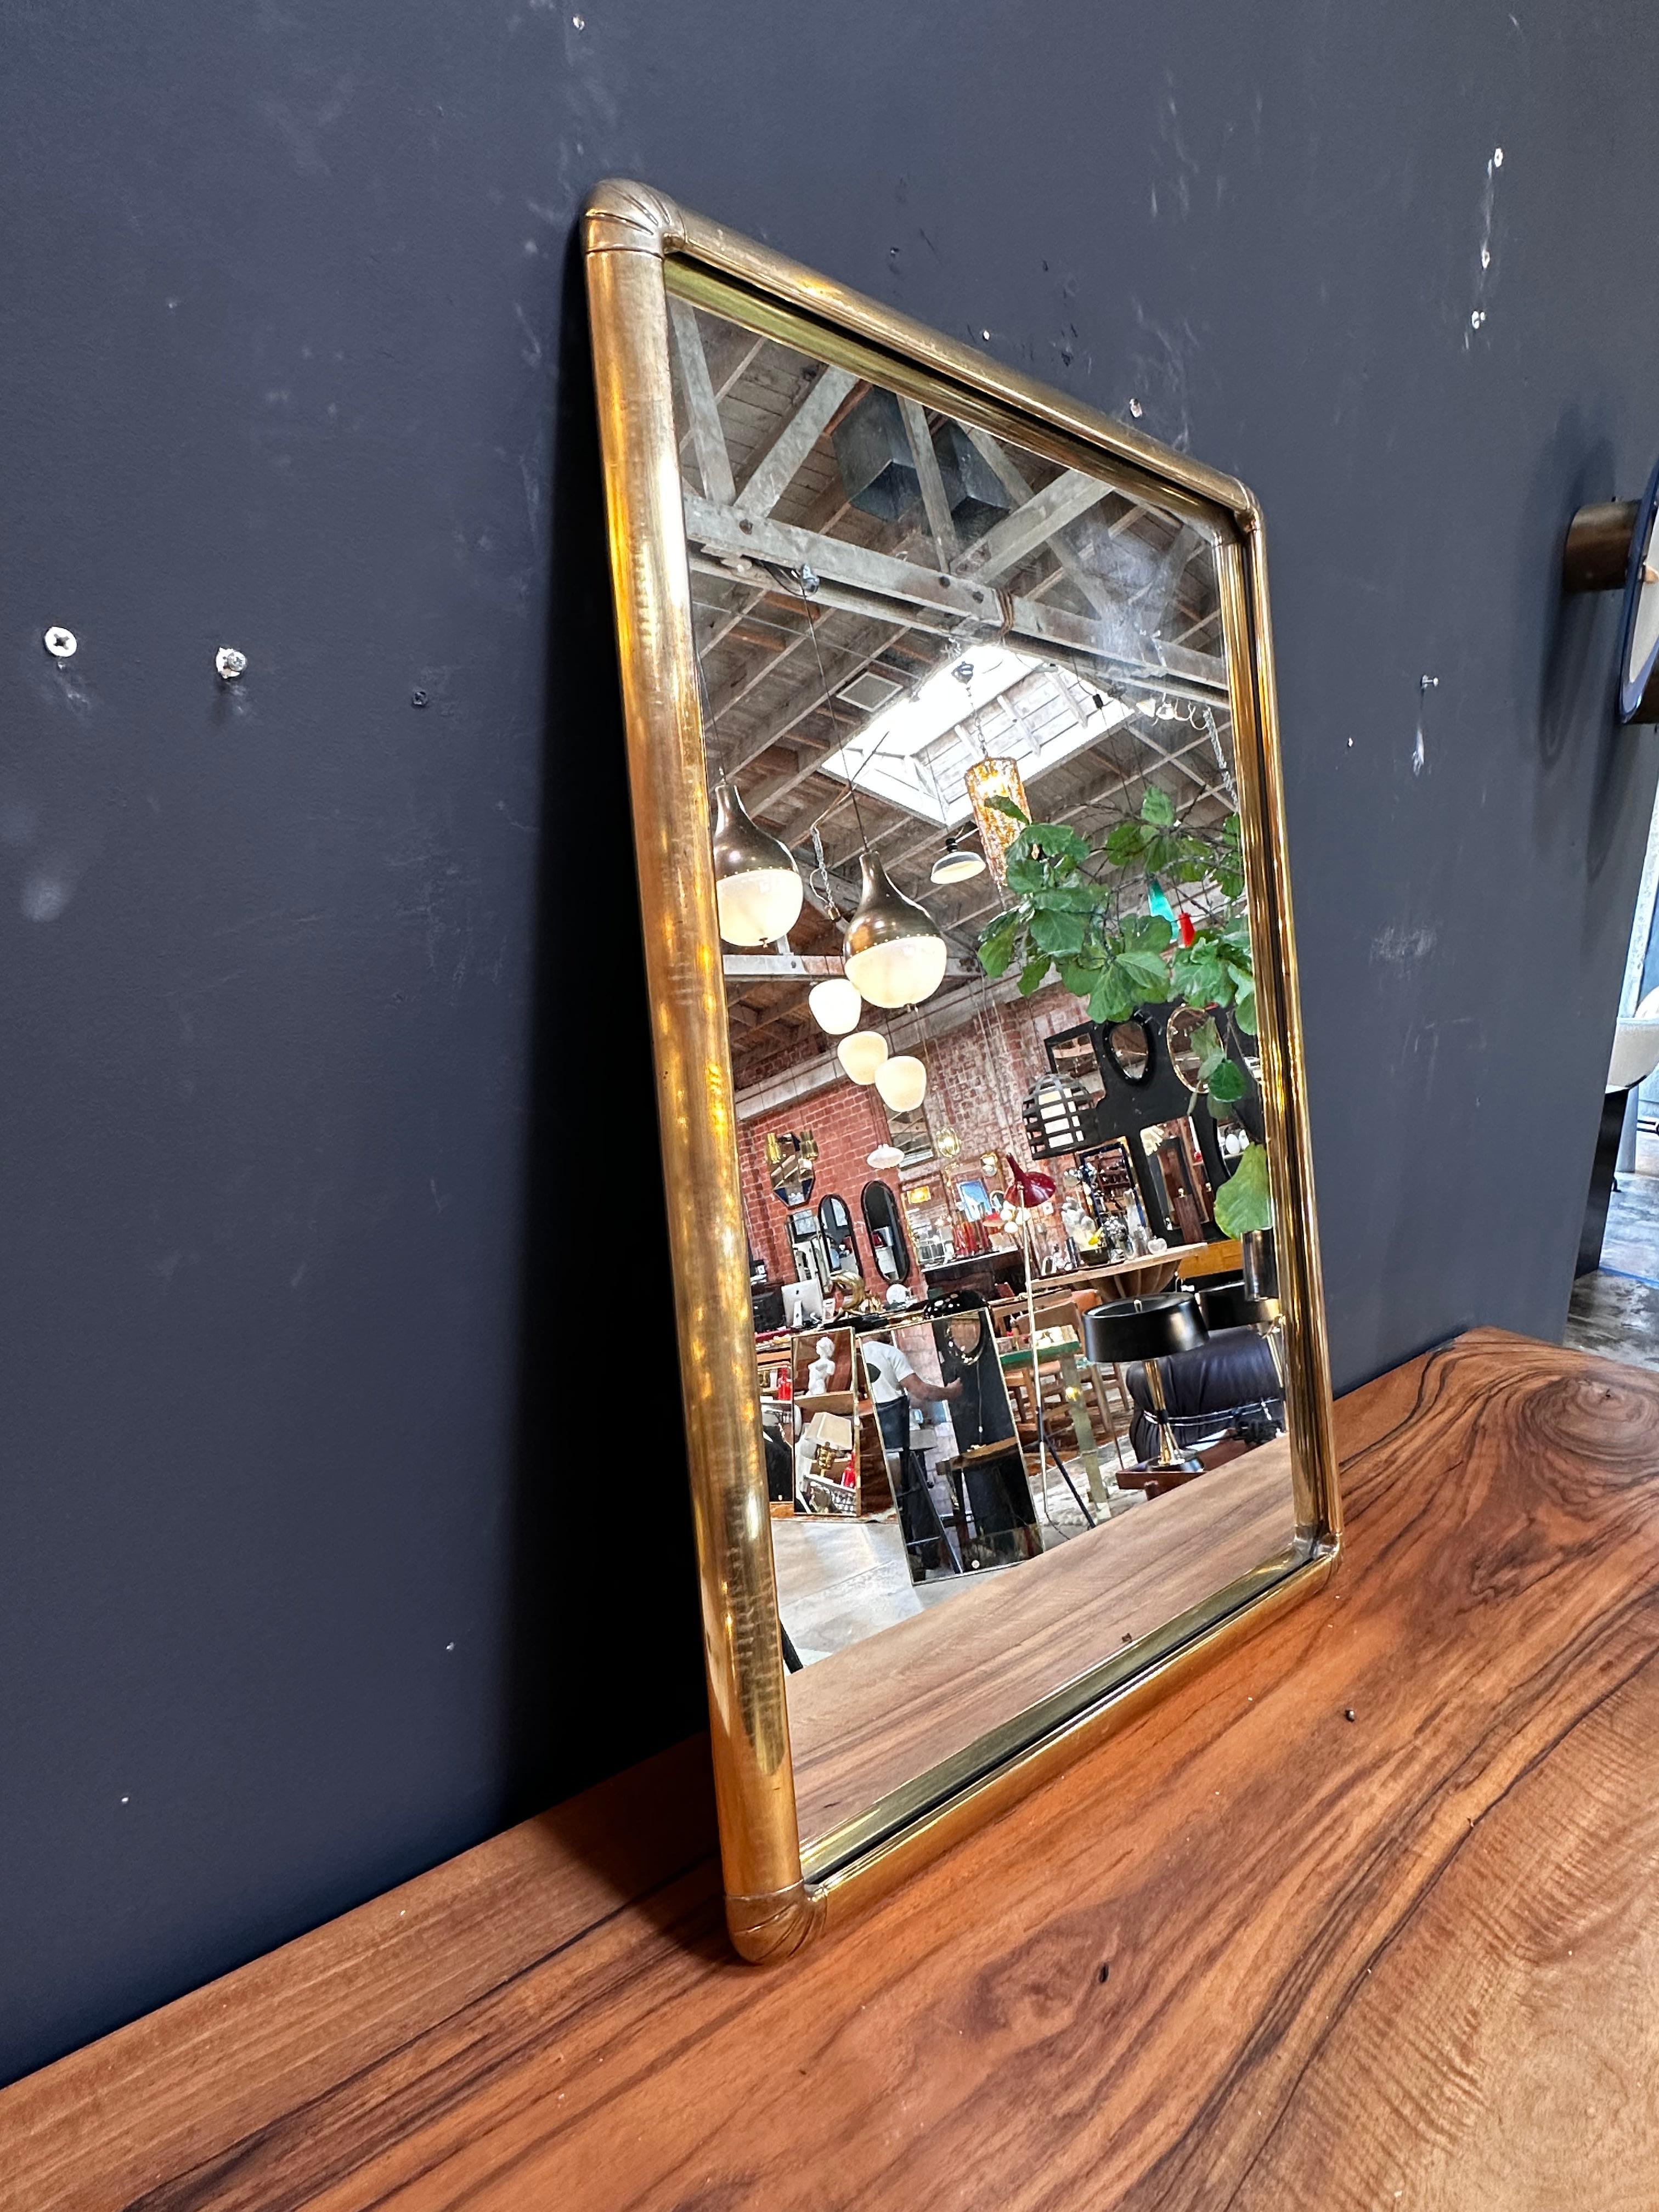 The Vintage Italian 1980s Brass Wall Mirror is a classic and timeless piece with a beautiful brass finish.

